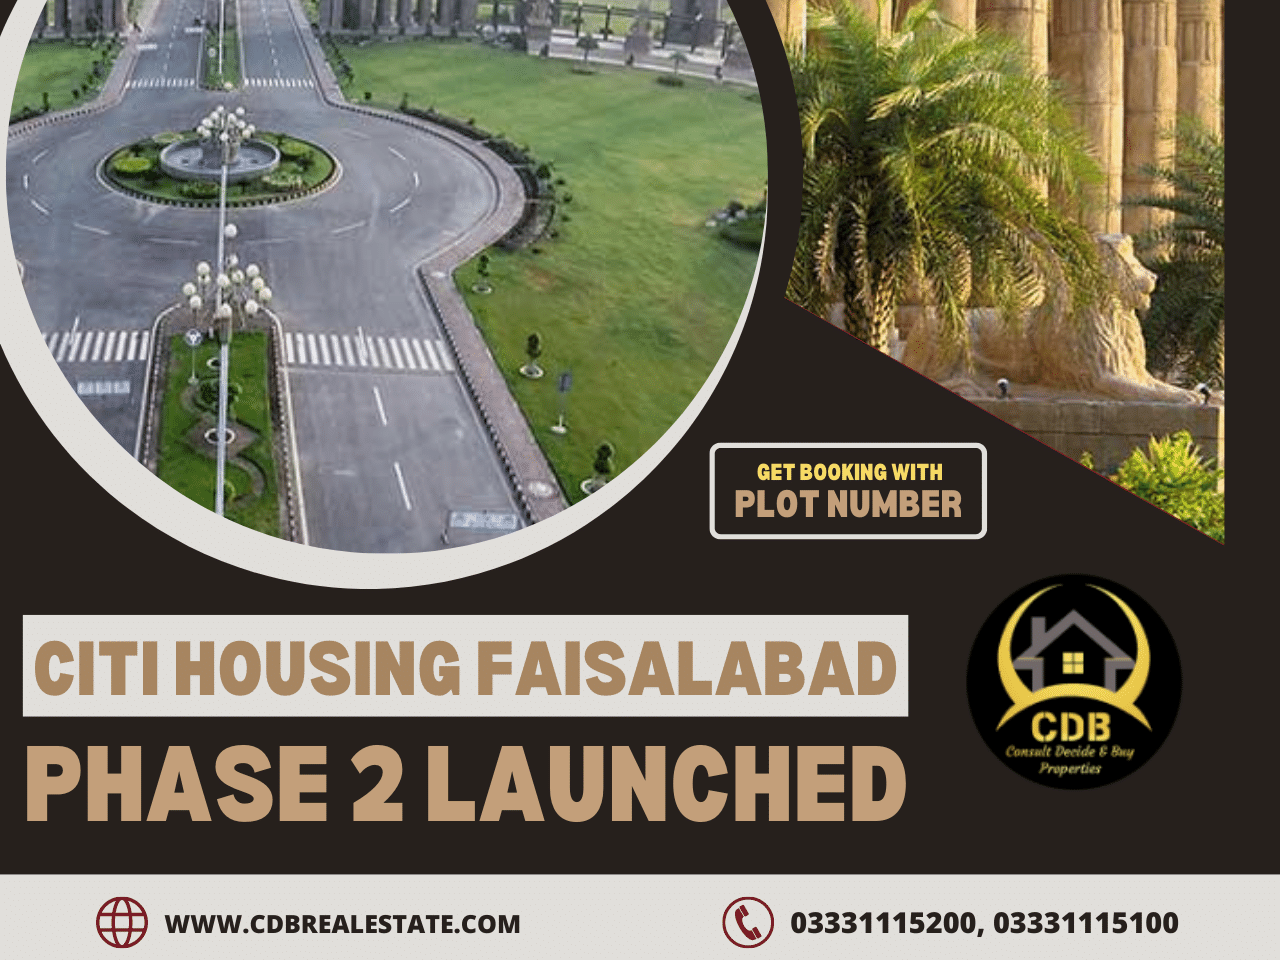 Citi Housing Faisalabad Phase 2 Launched